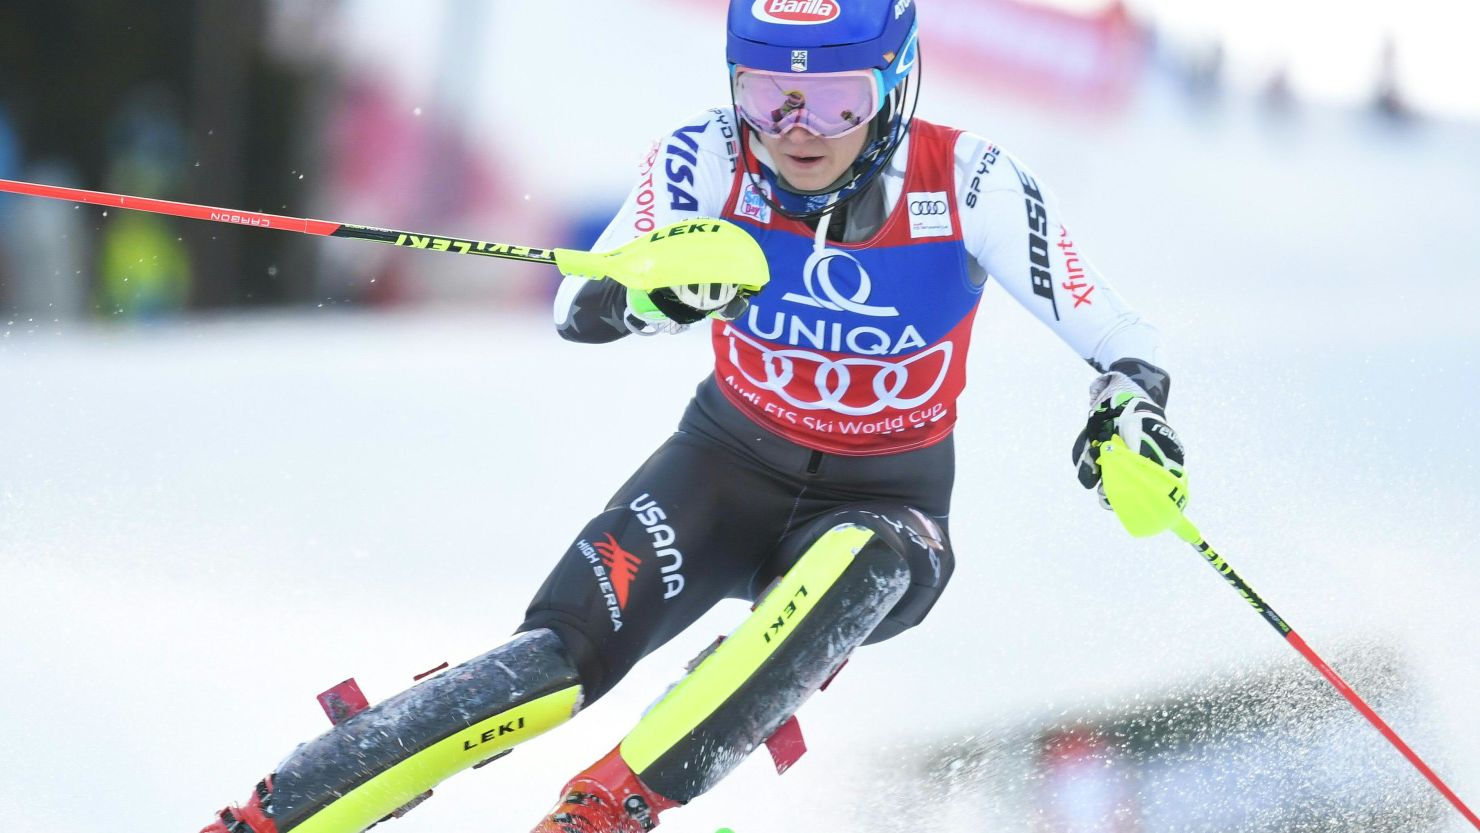 Mikaela Shiffrin turns on the style during her record breaking victory in the World Cup slalom event in Semmering in Austria to record her 15th World Cup victory of the season. 